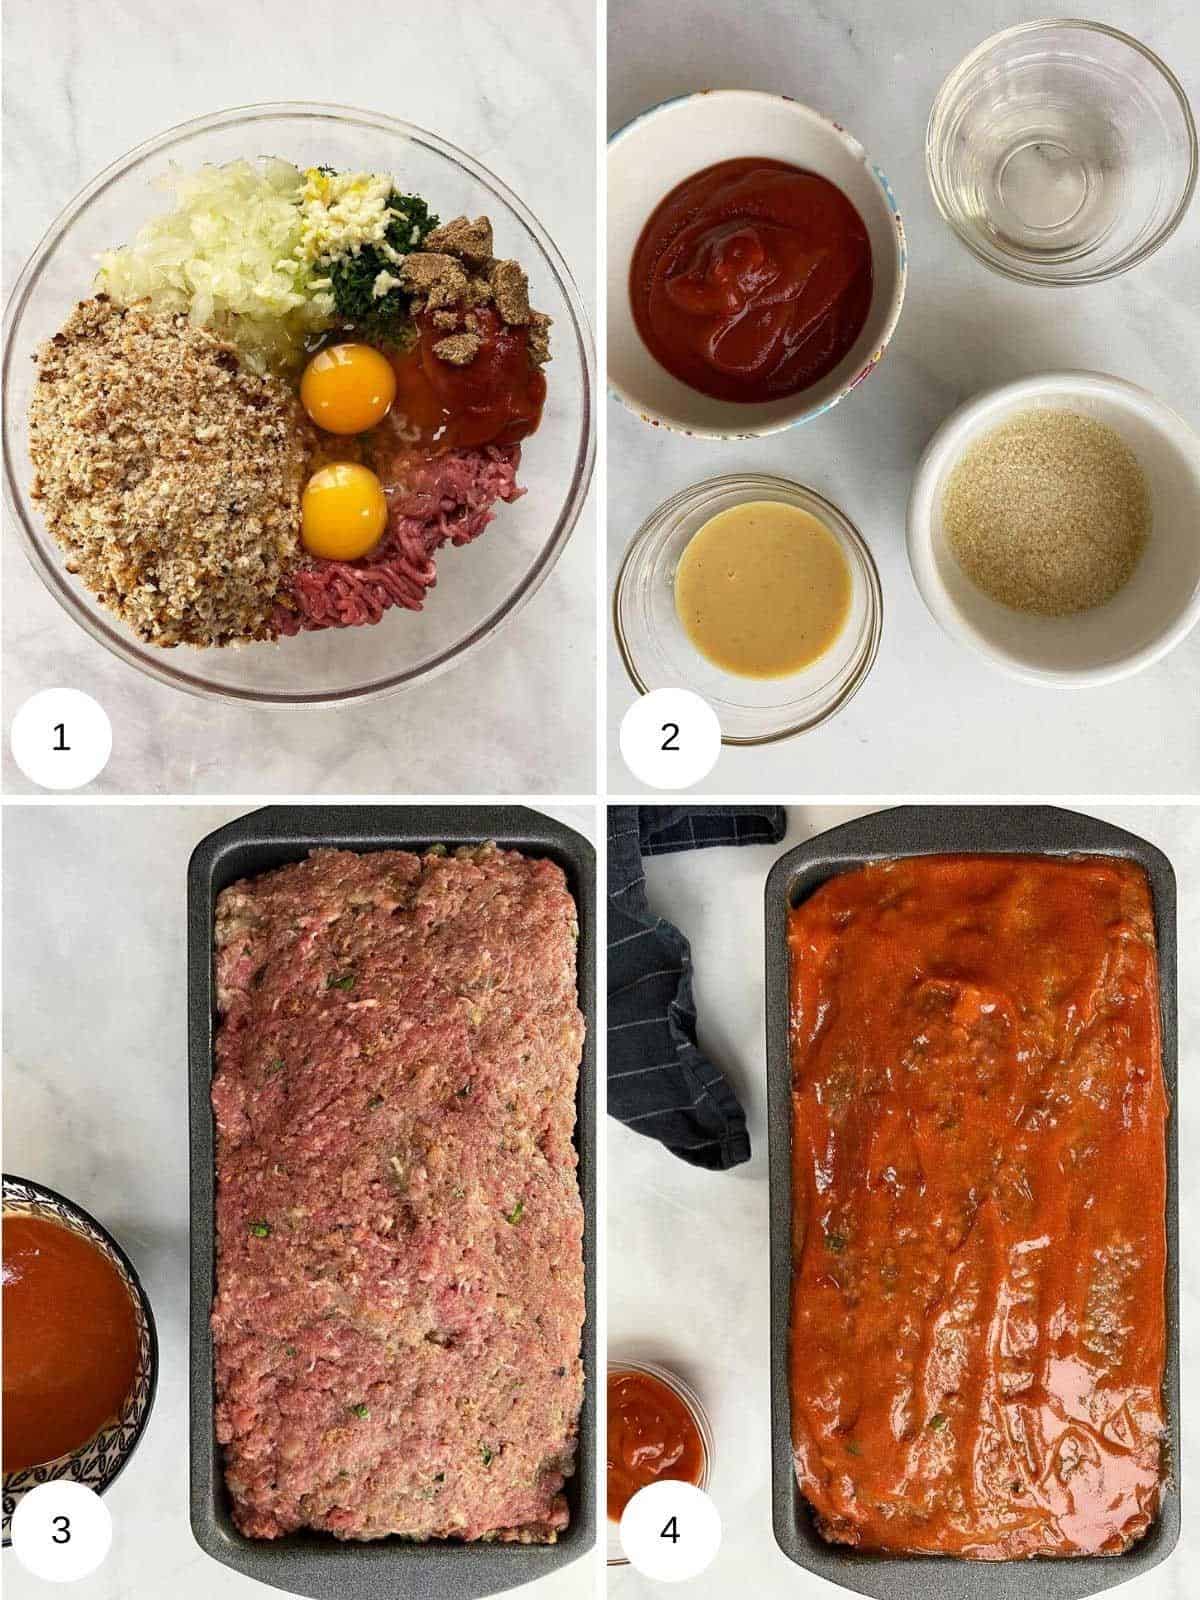 4 pictures showing the process of making low calorie meatloaf